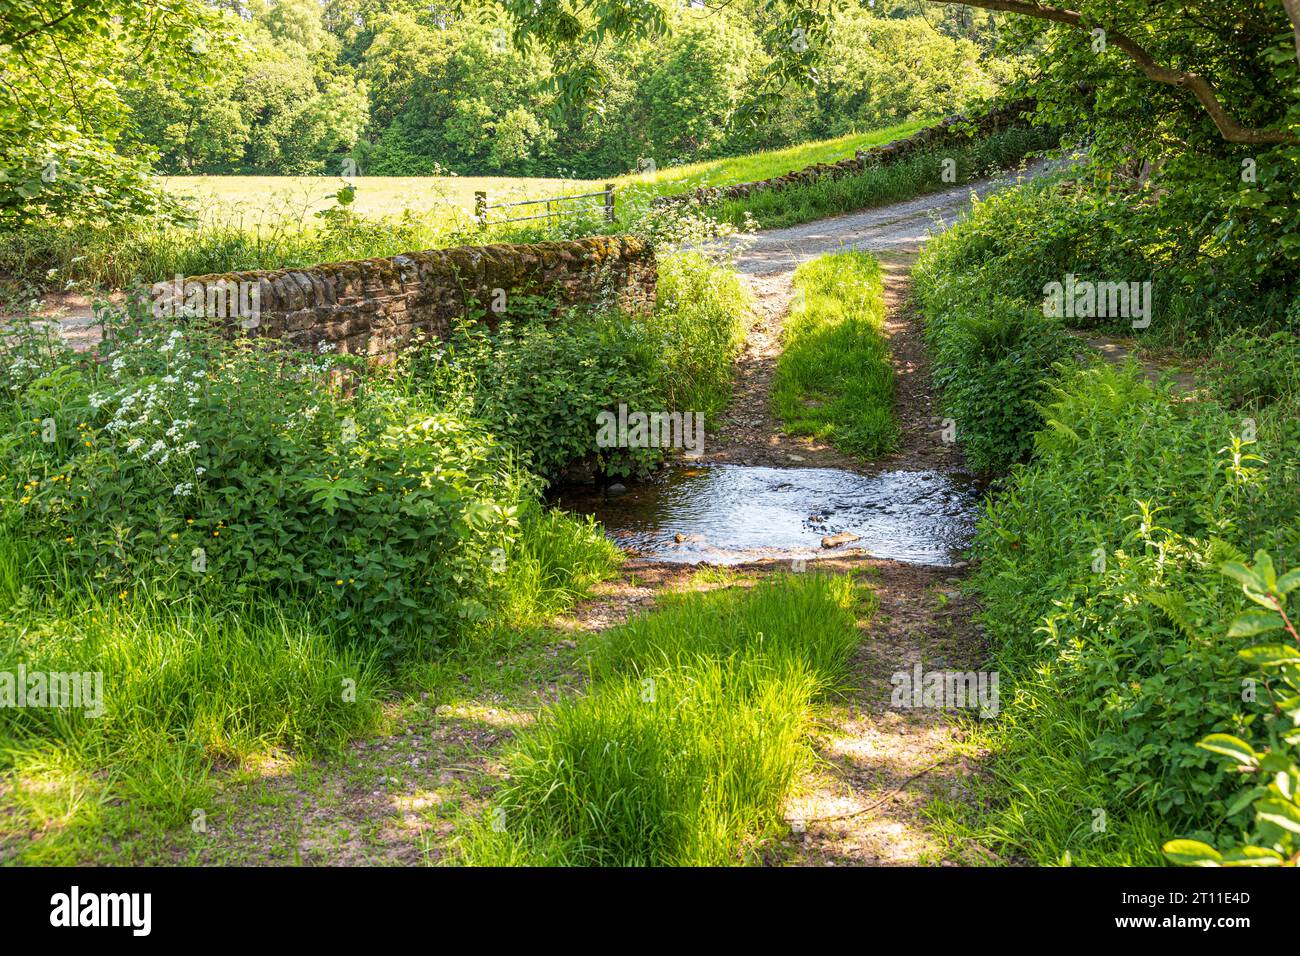 The Castle Carrock Beck going under a bridge on a lane at the foot of the Pennines near the village of Castle Carrock, Cumbria, England UK Stock Photo